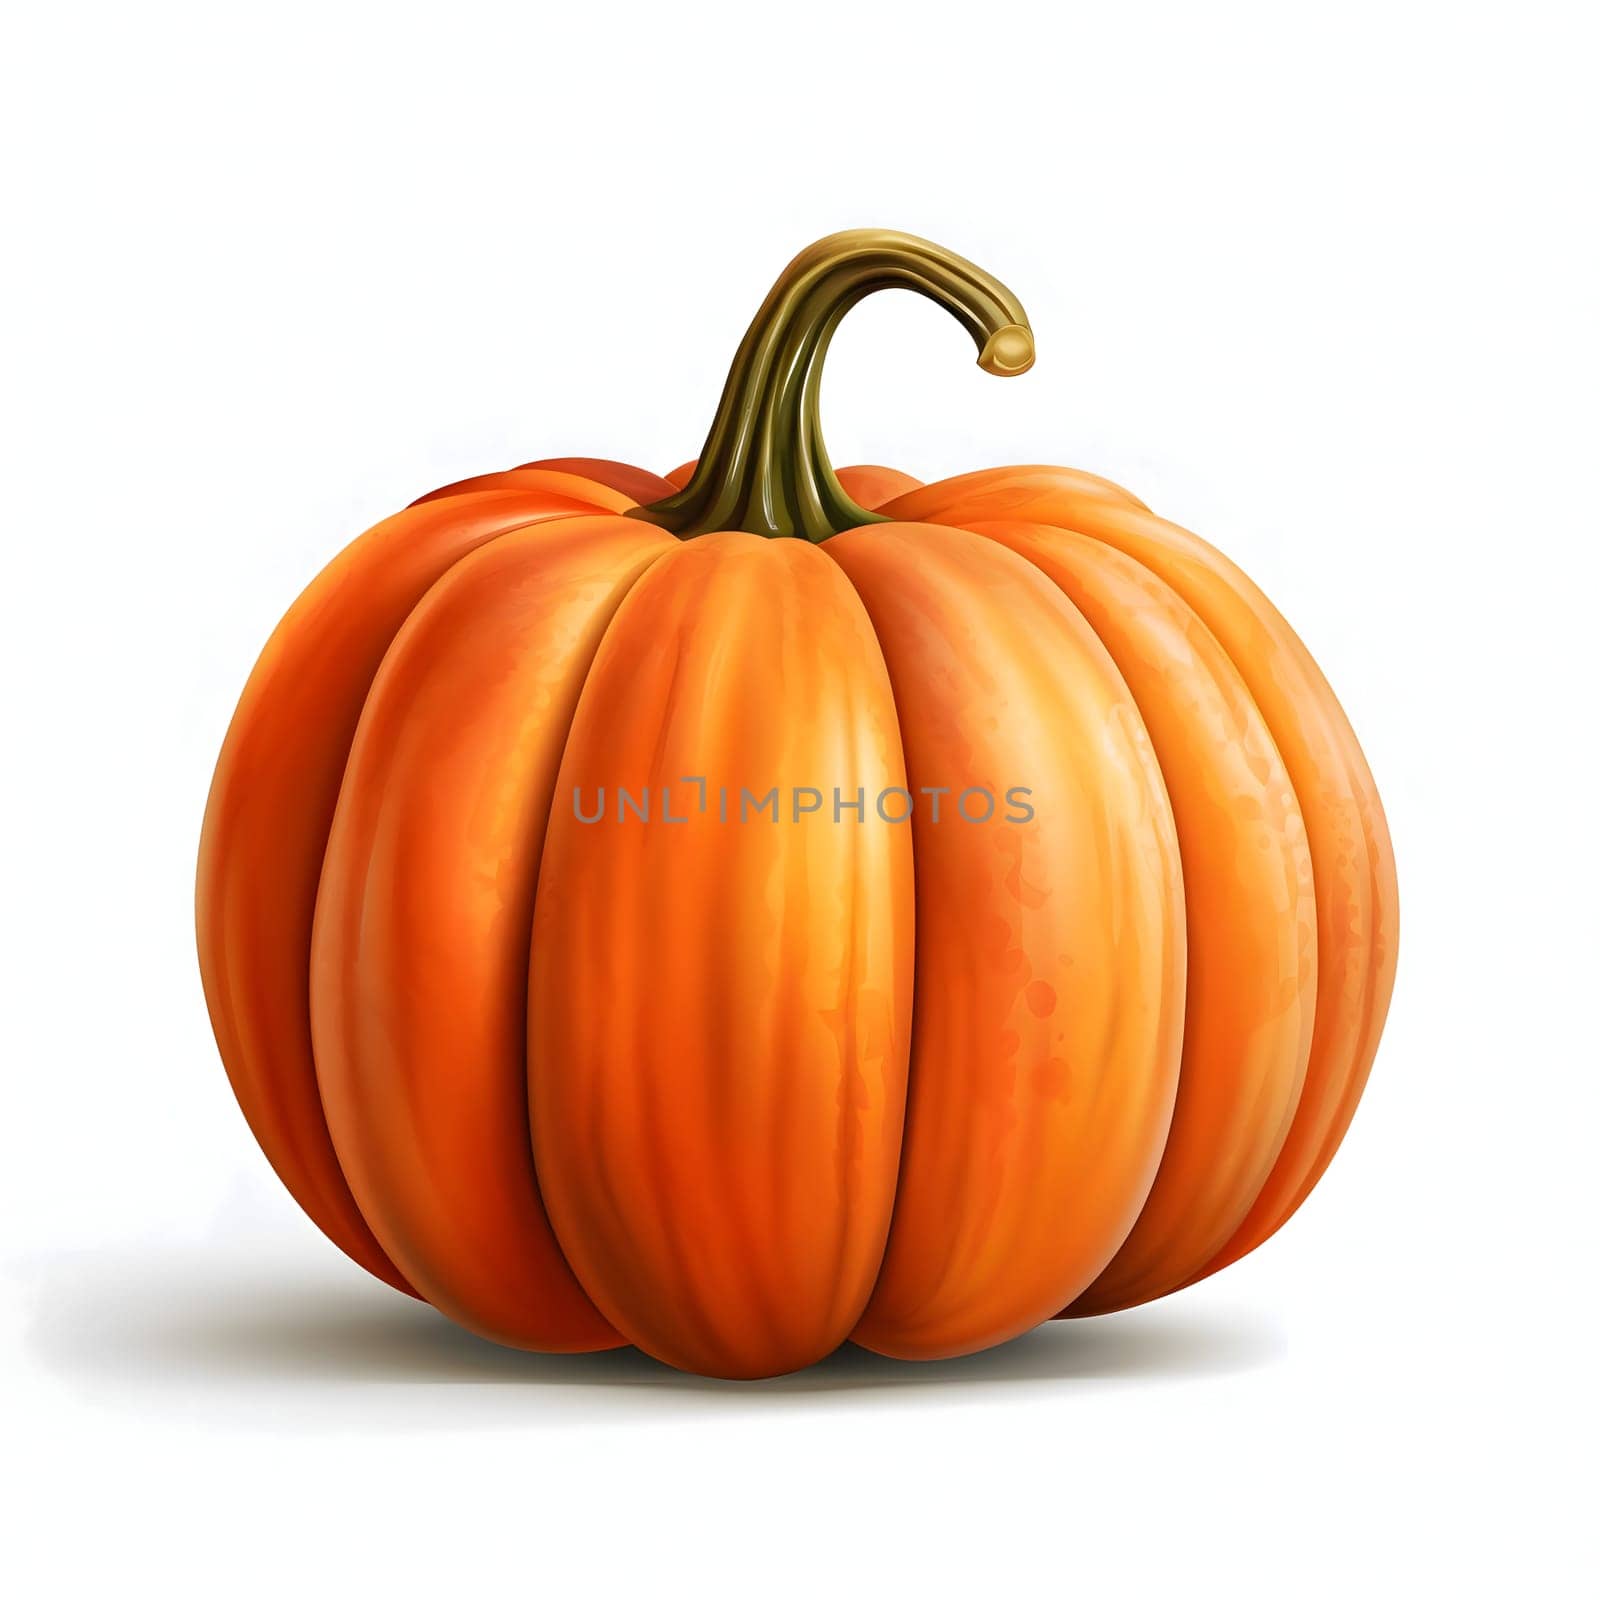 Pumpkin, Halloween image on a white isolated background. Atmosphere of darkness and fear.